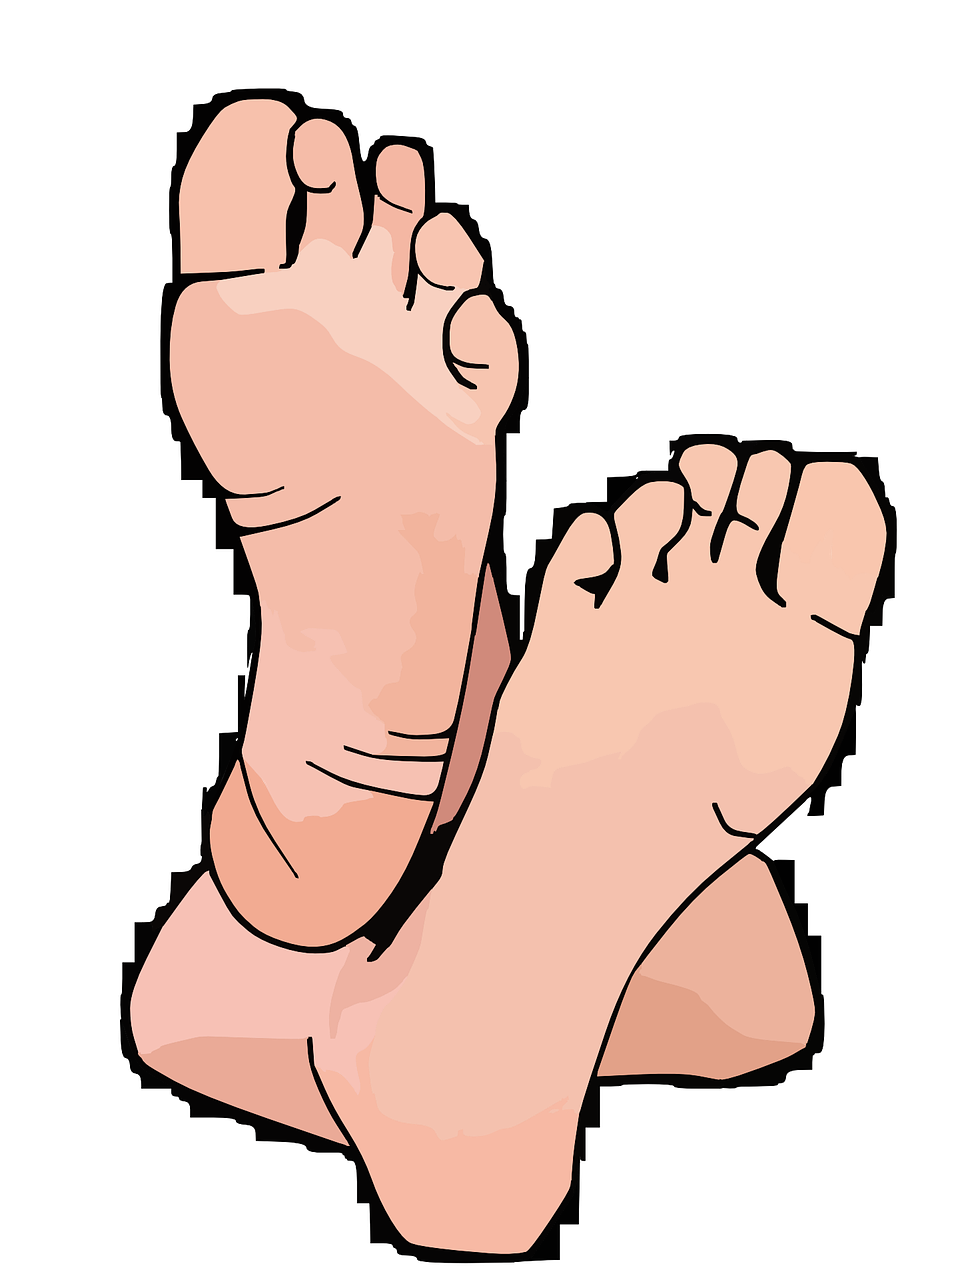 a pair of feet sitting on top of each other, an illustration of, pixabay, sots art, cell shaded adult animation, cartoonish vector style, simple path traced, human skin